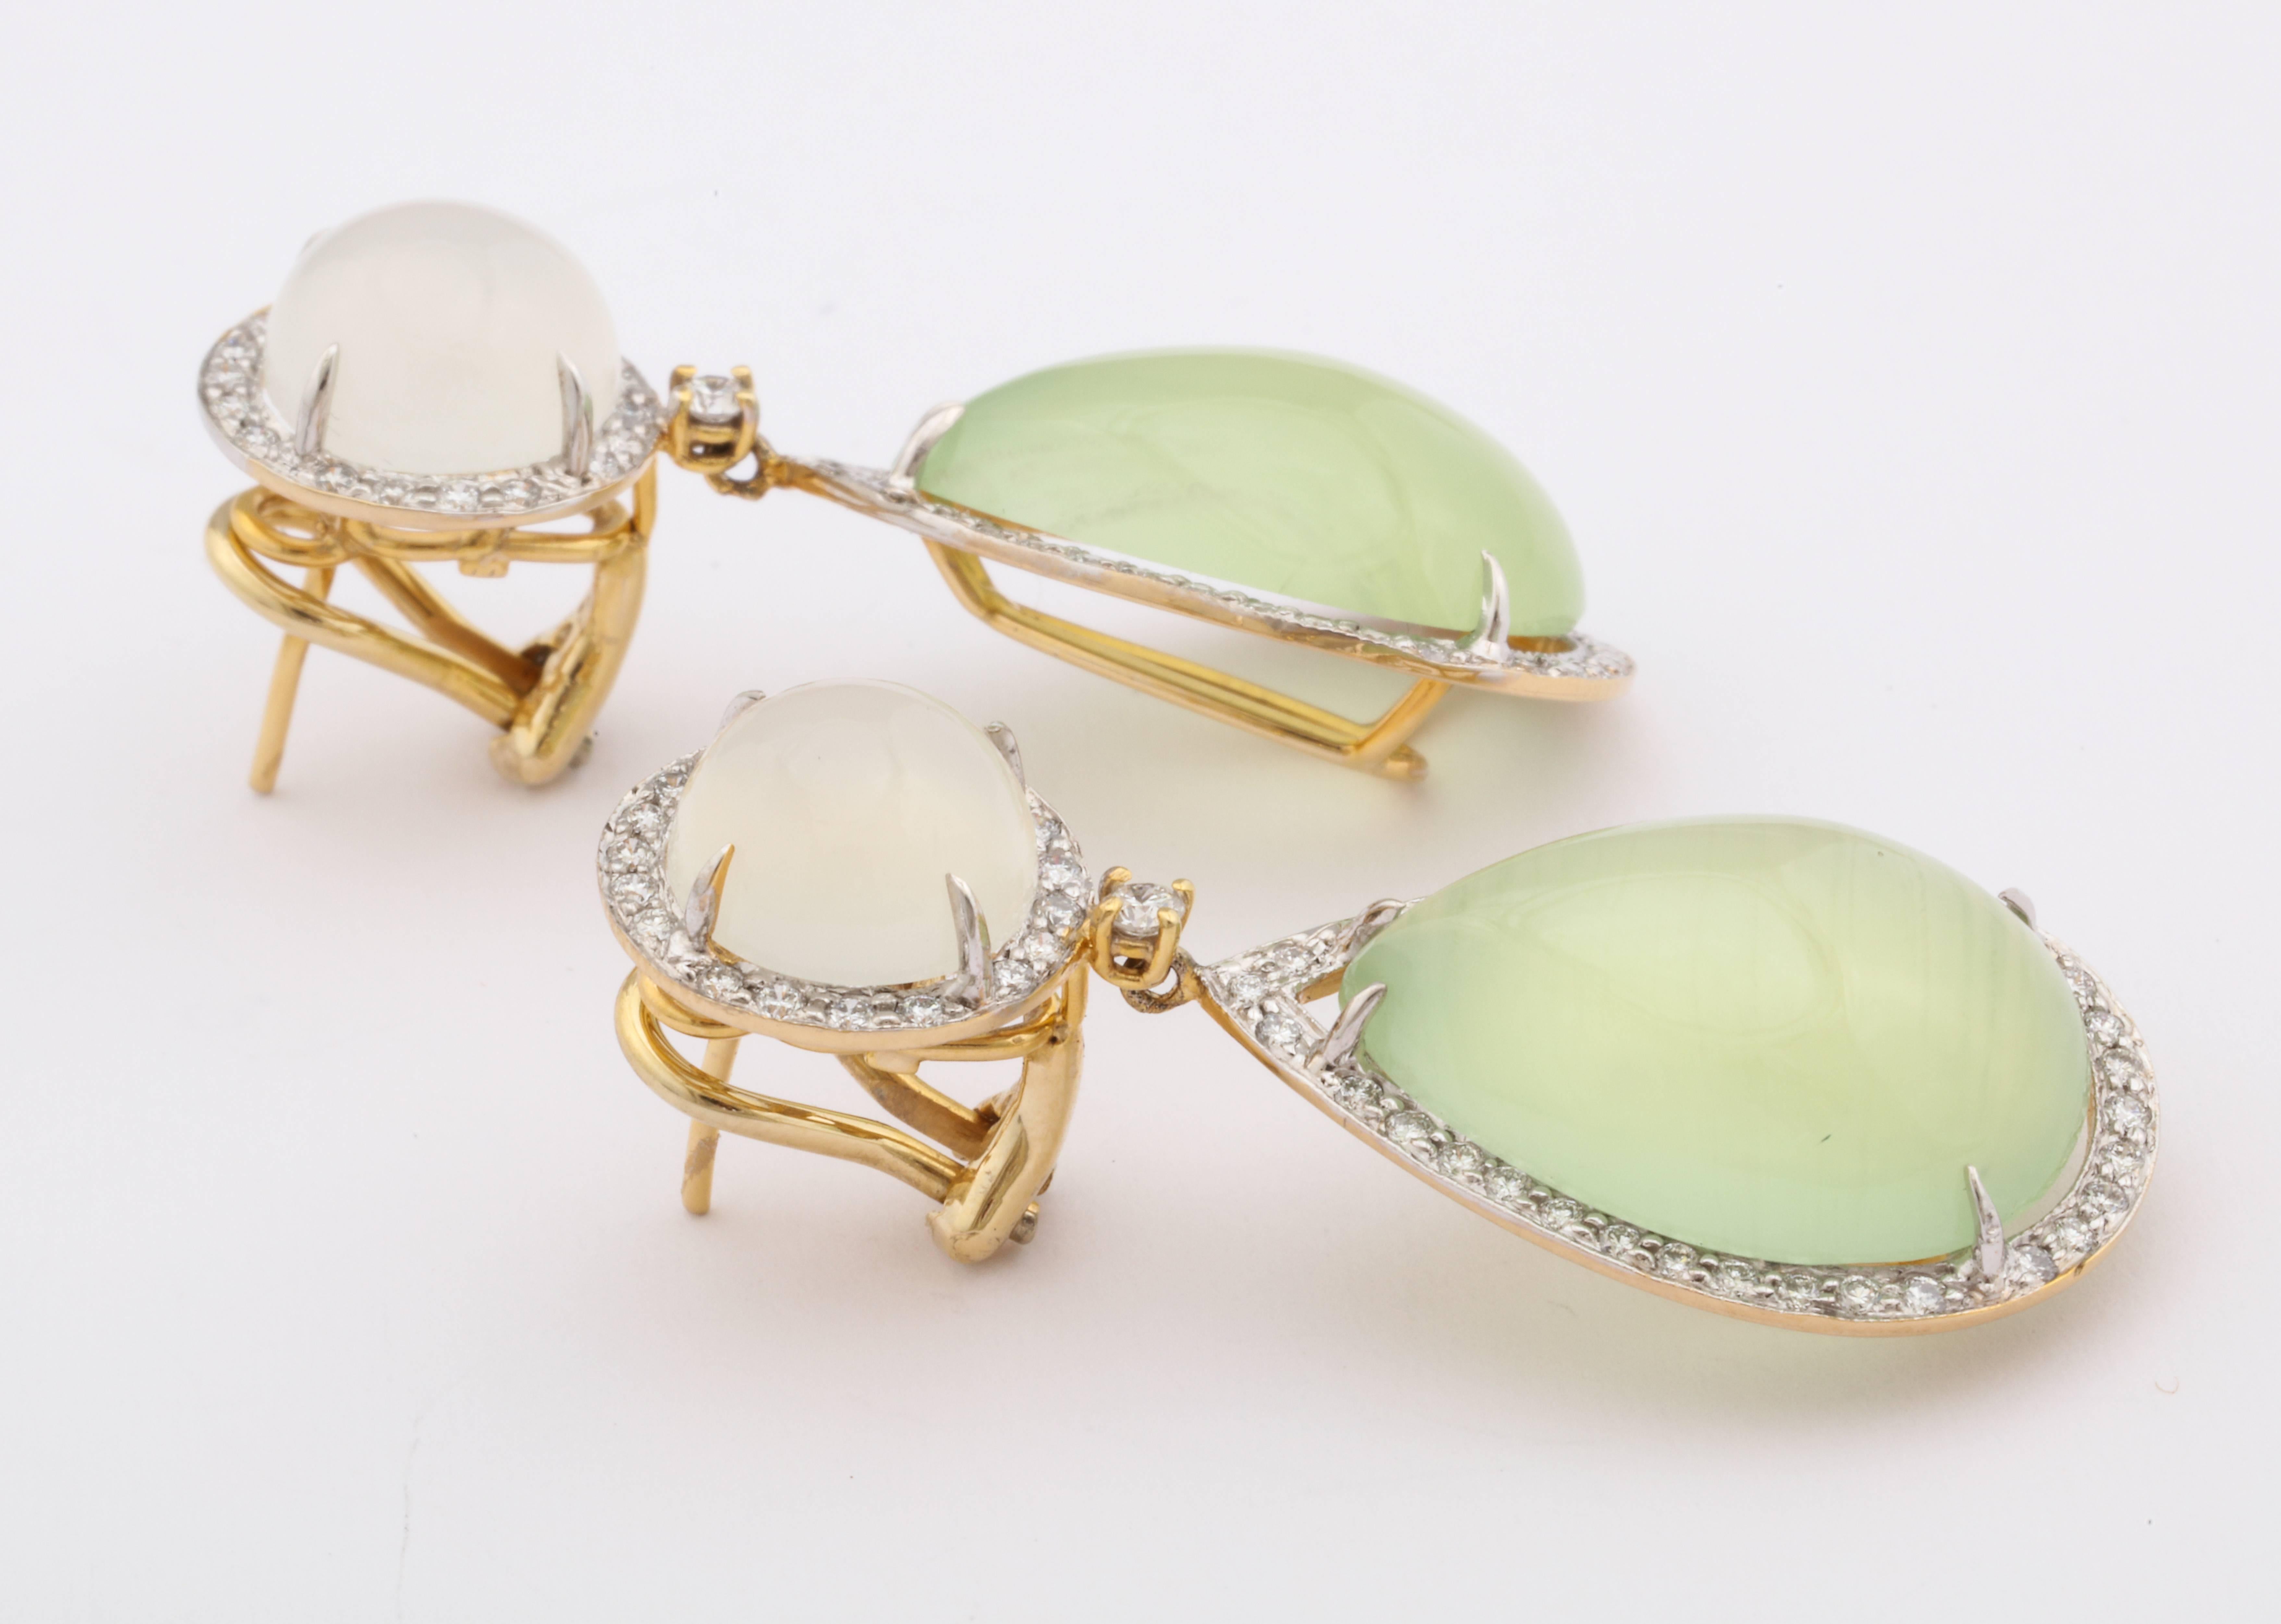 Faraone Mennella Grotta Verde Earrings In New Condition For Sale In New York, NY